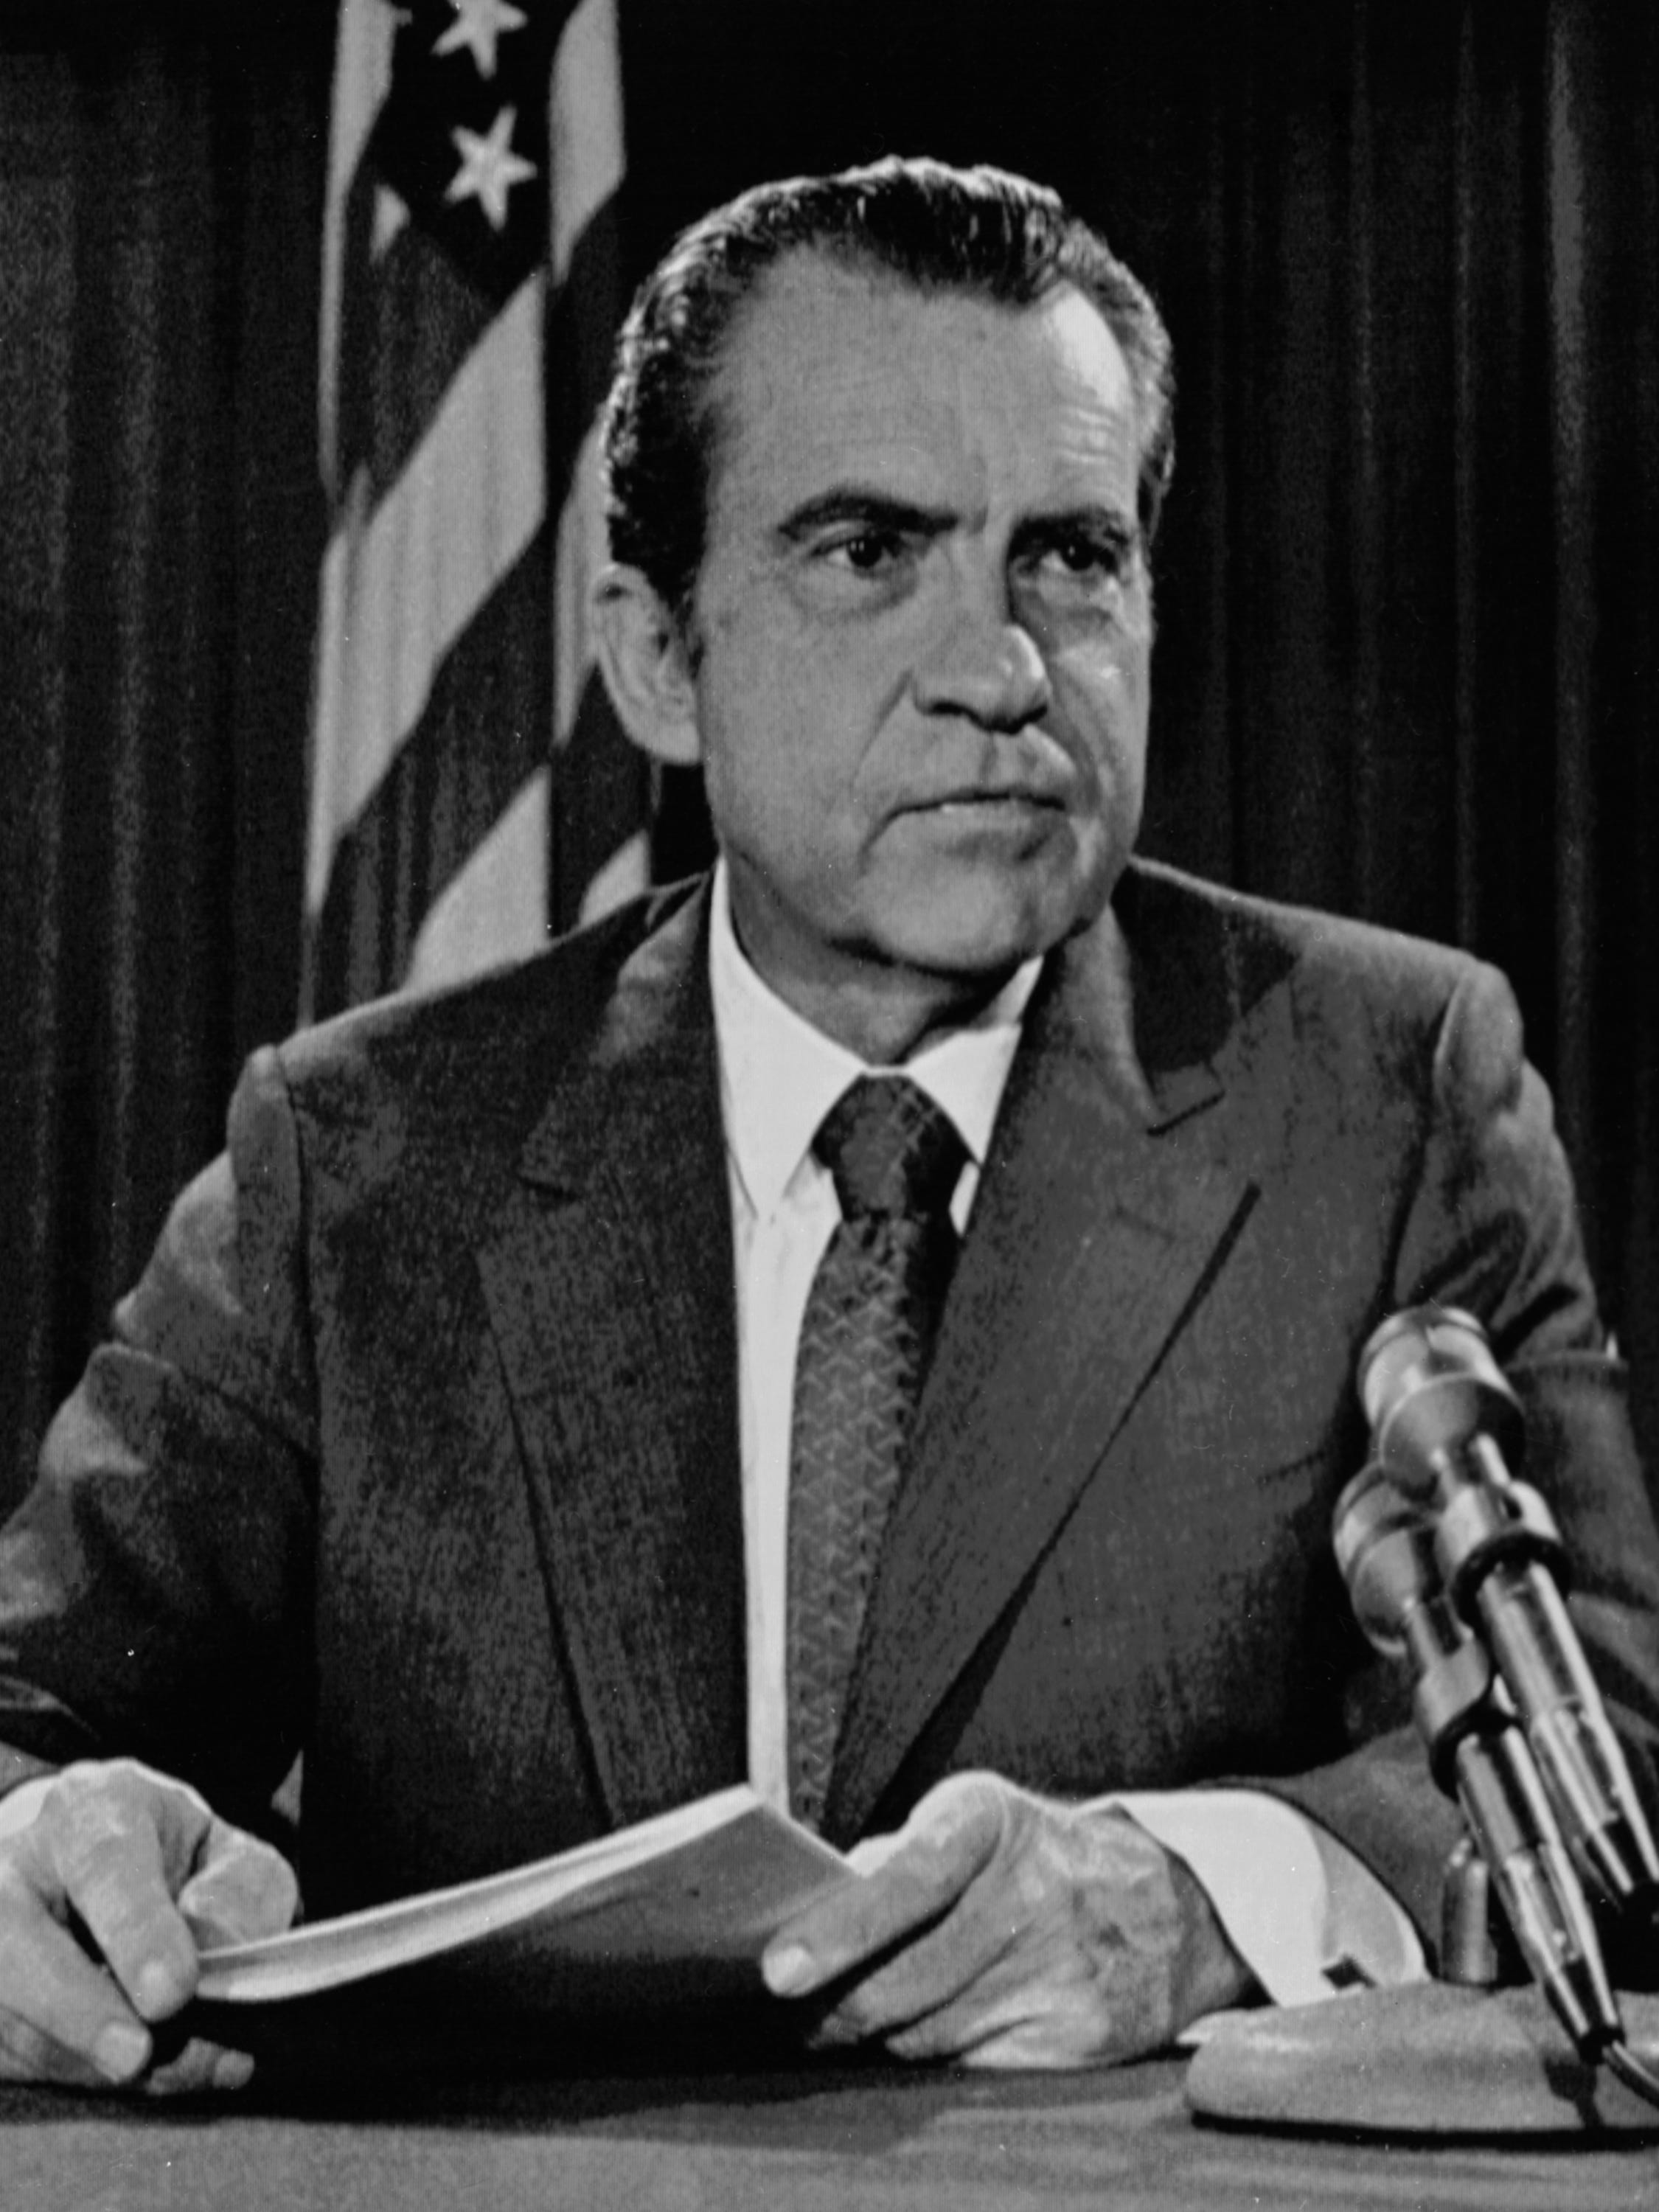 American President Richard Nixon poses for pictures in his White House office, on Aug. 15, 1971, after a nationwide television speech which dealt with economic policies.